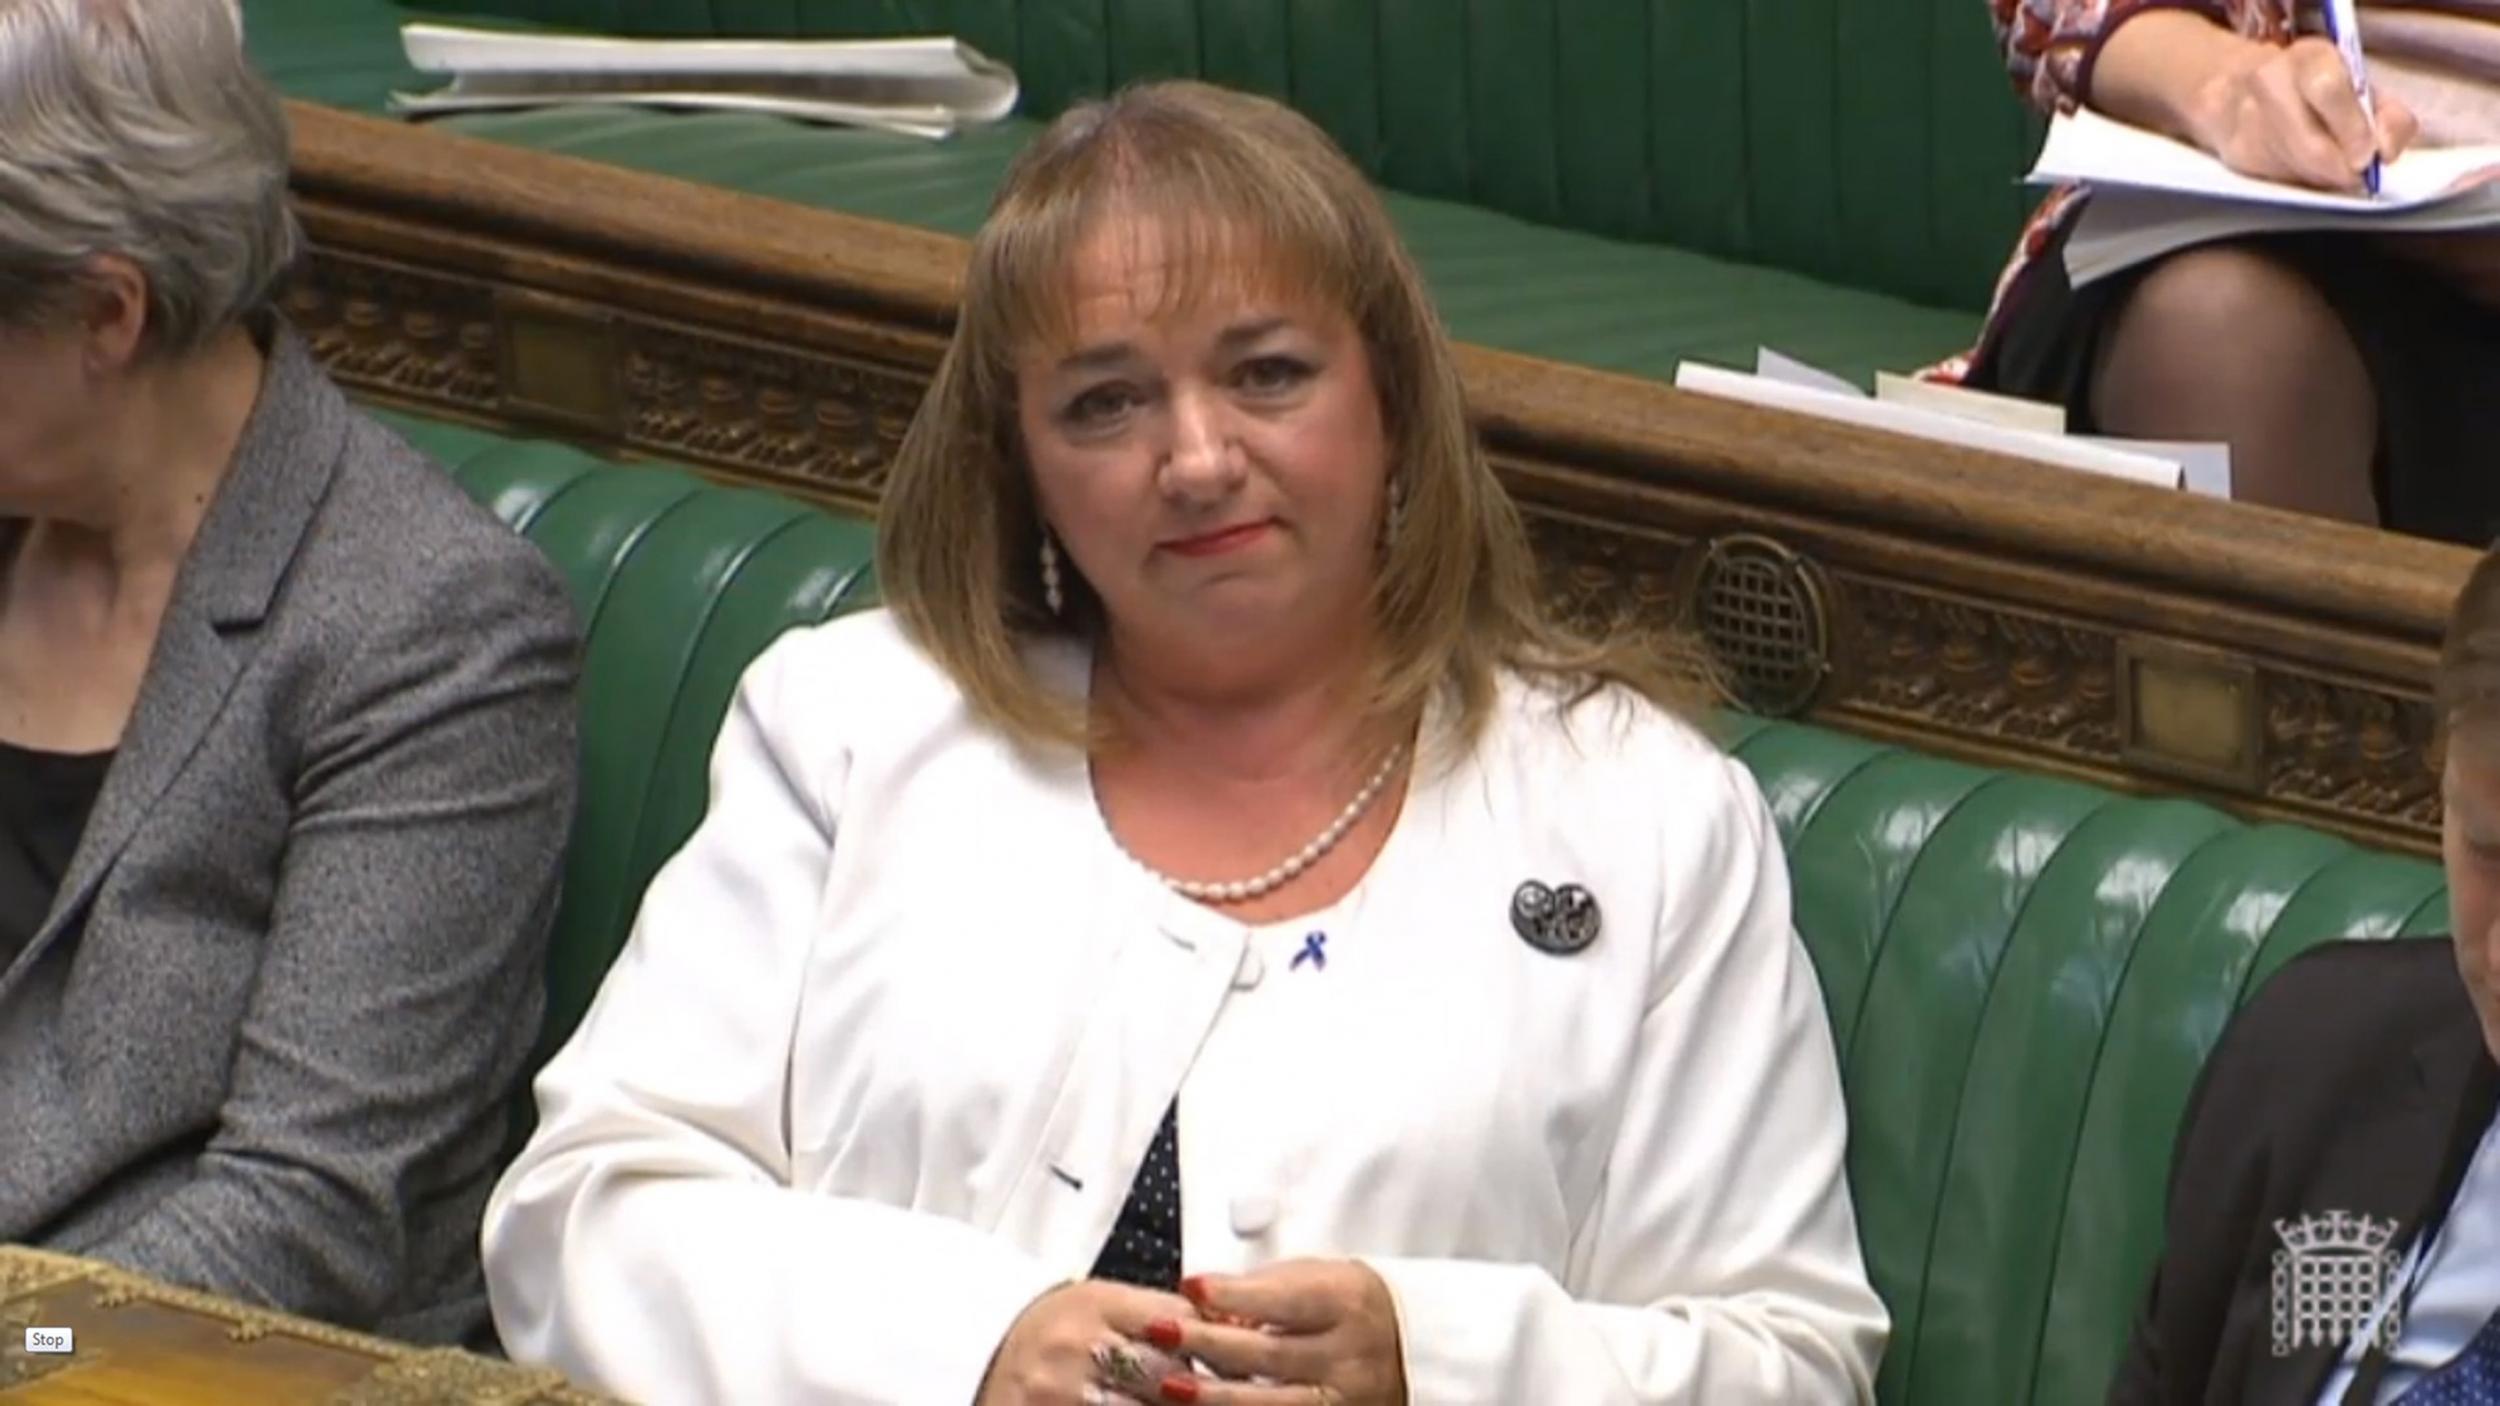 Labour's Shadow Public Health Minister Sharon Hodgson has called for a public inquiry into the use of surgical mesh implants